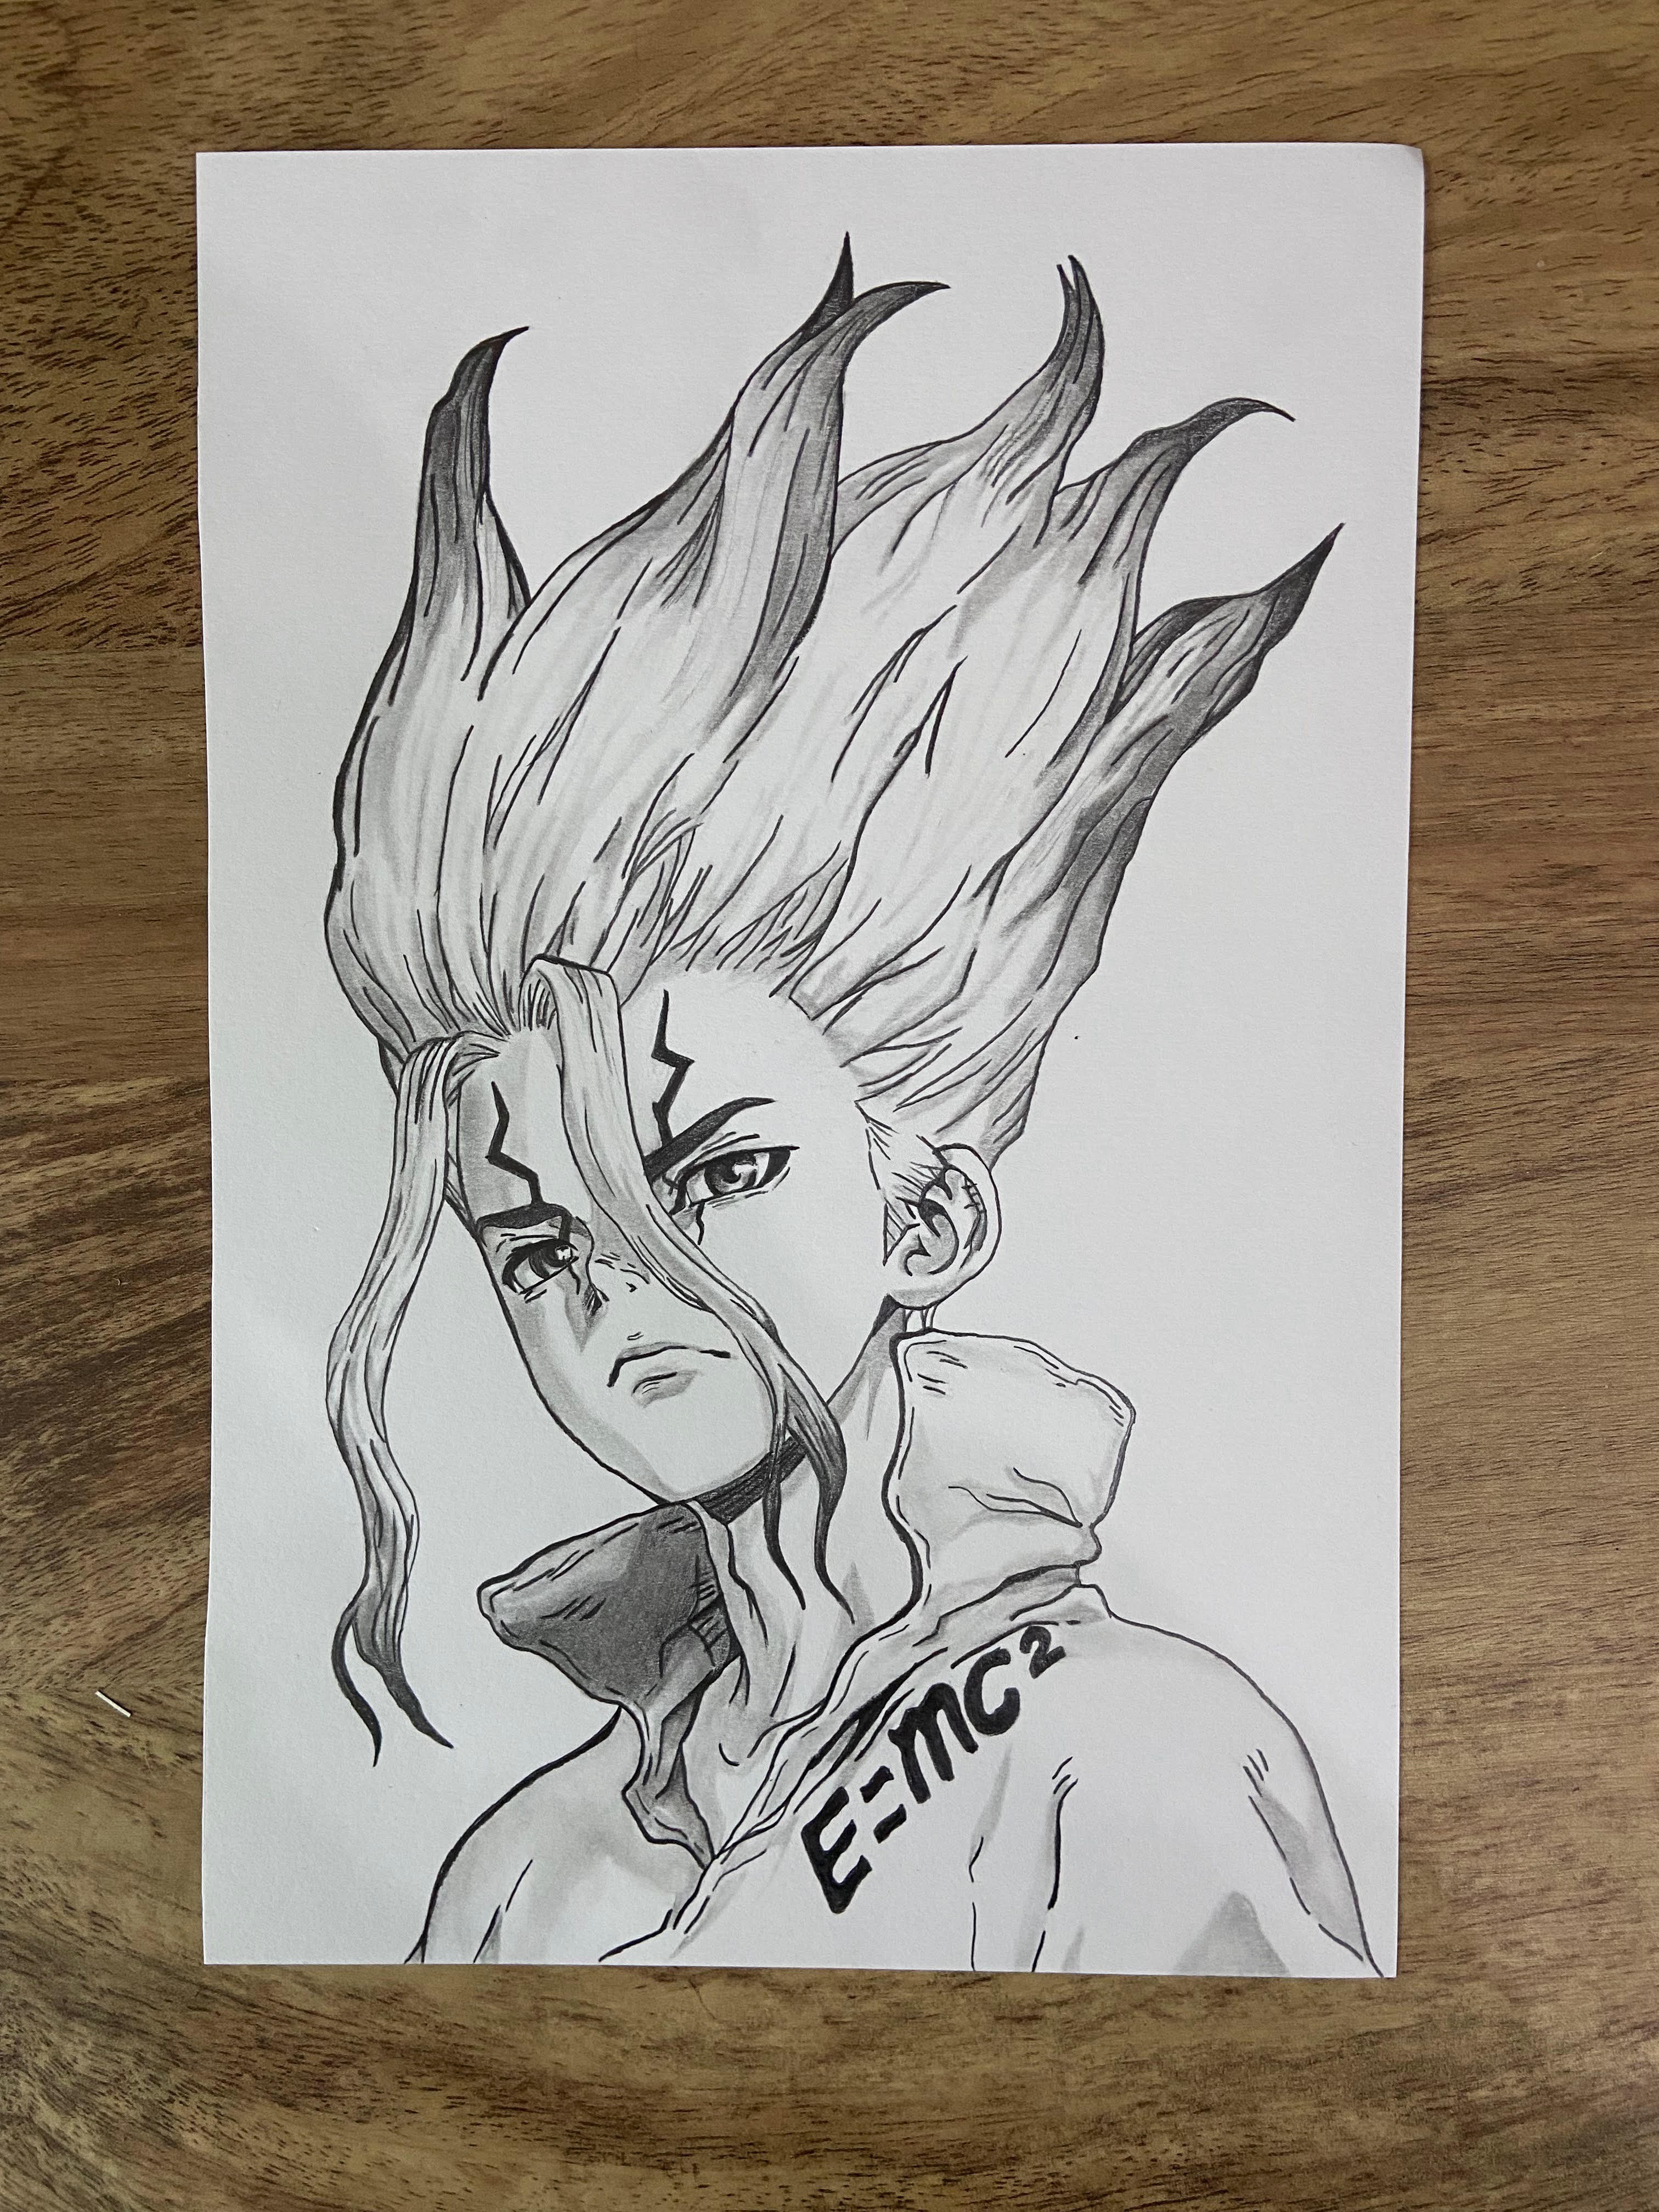 Pencil drawing of Senku from the anime 'Dr. Stone'